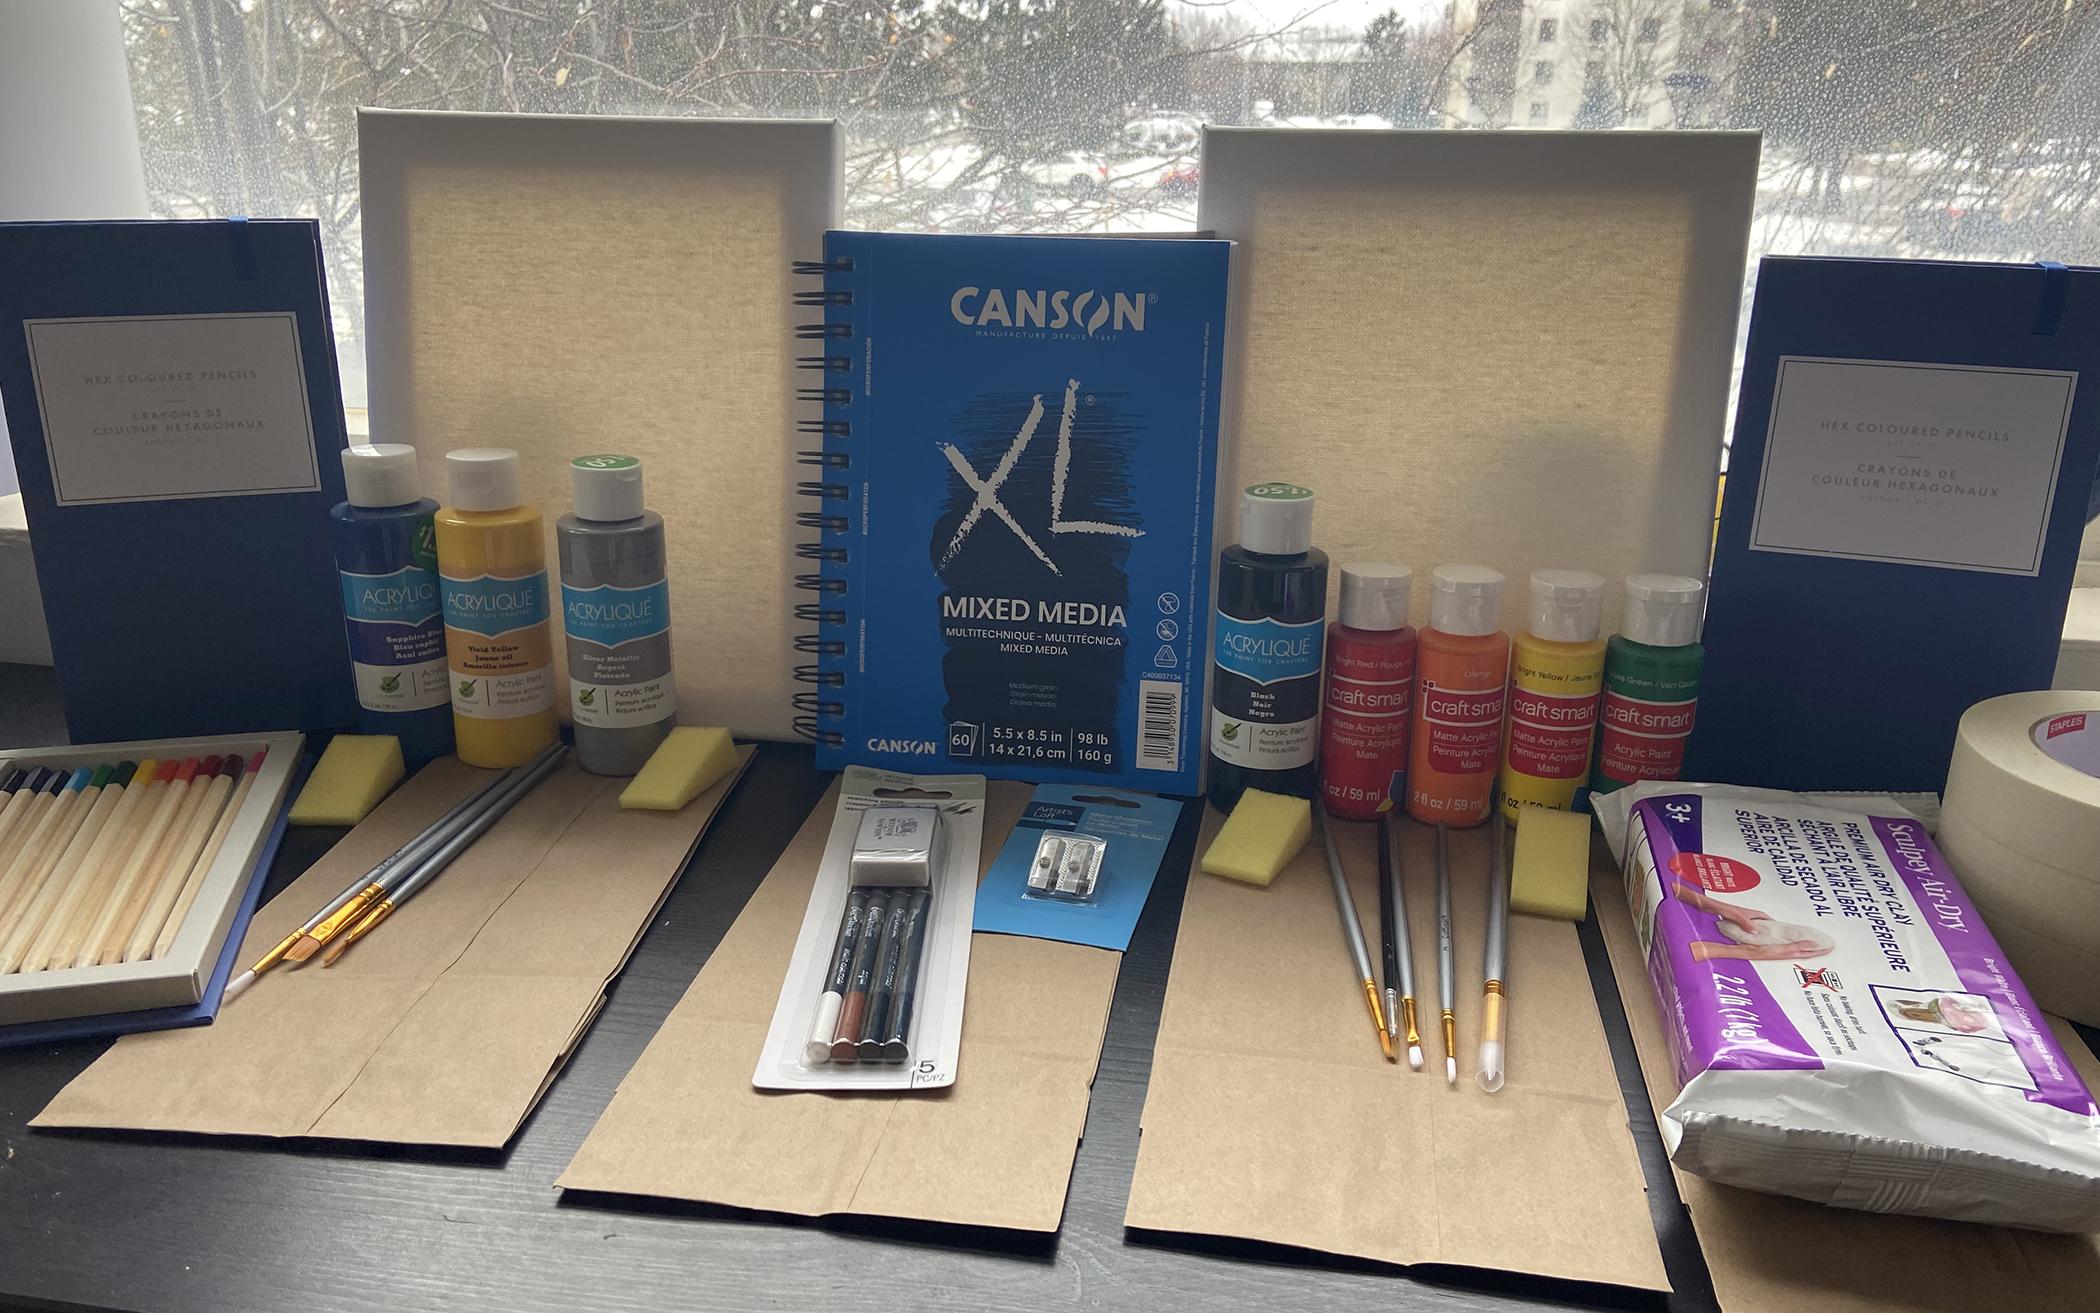 Fanshawe Campus Ministry pairs art materials with Scripture study in its Art at Home kits.
